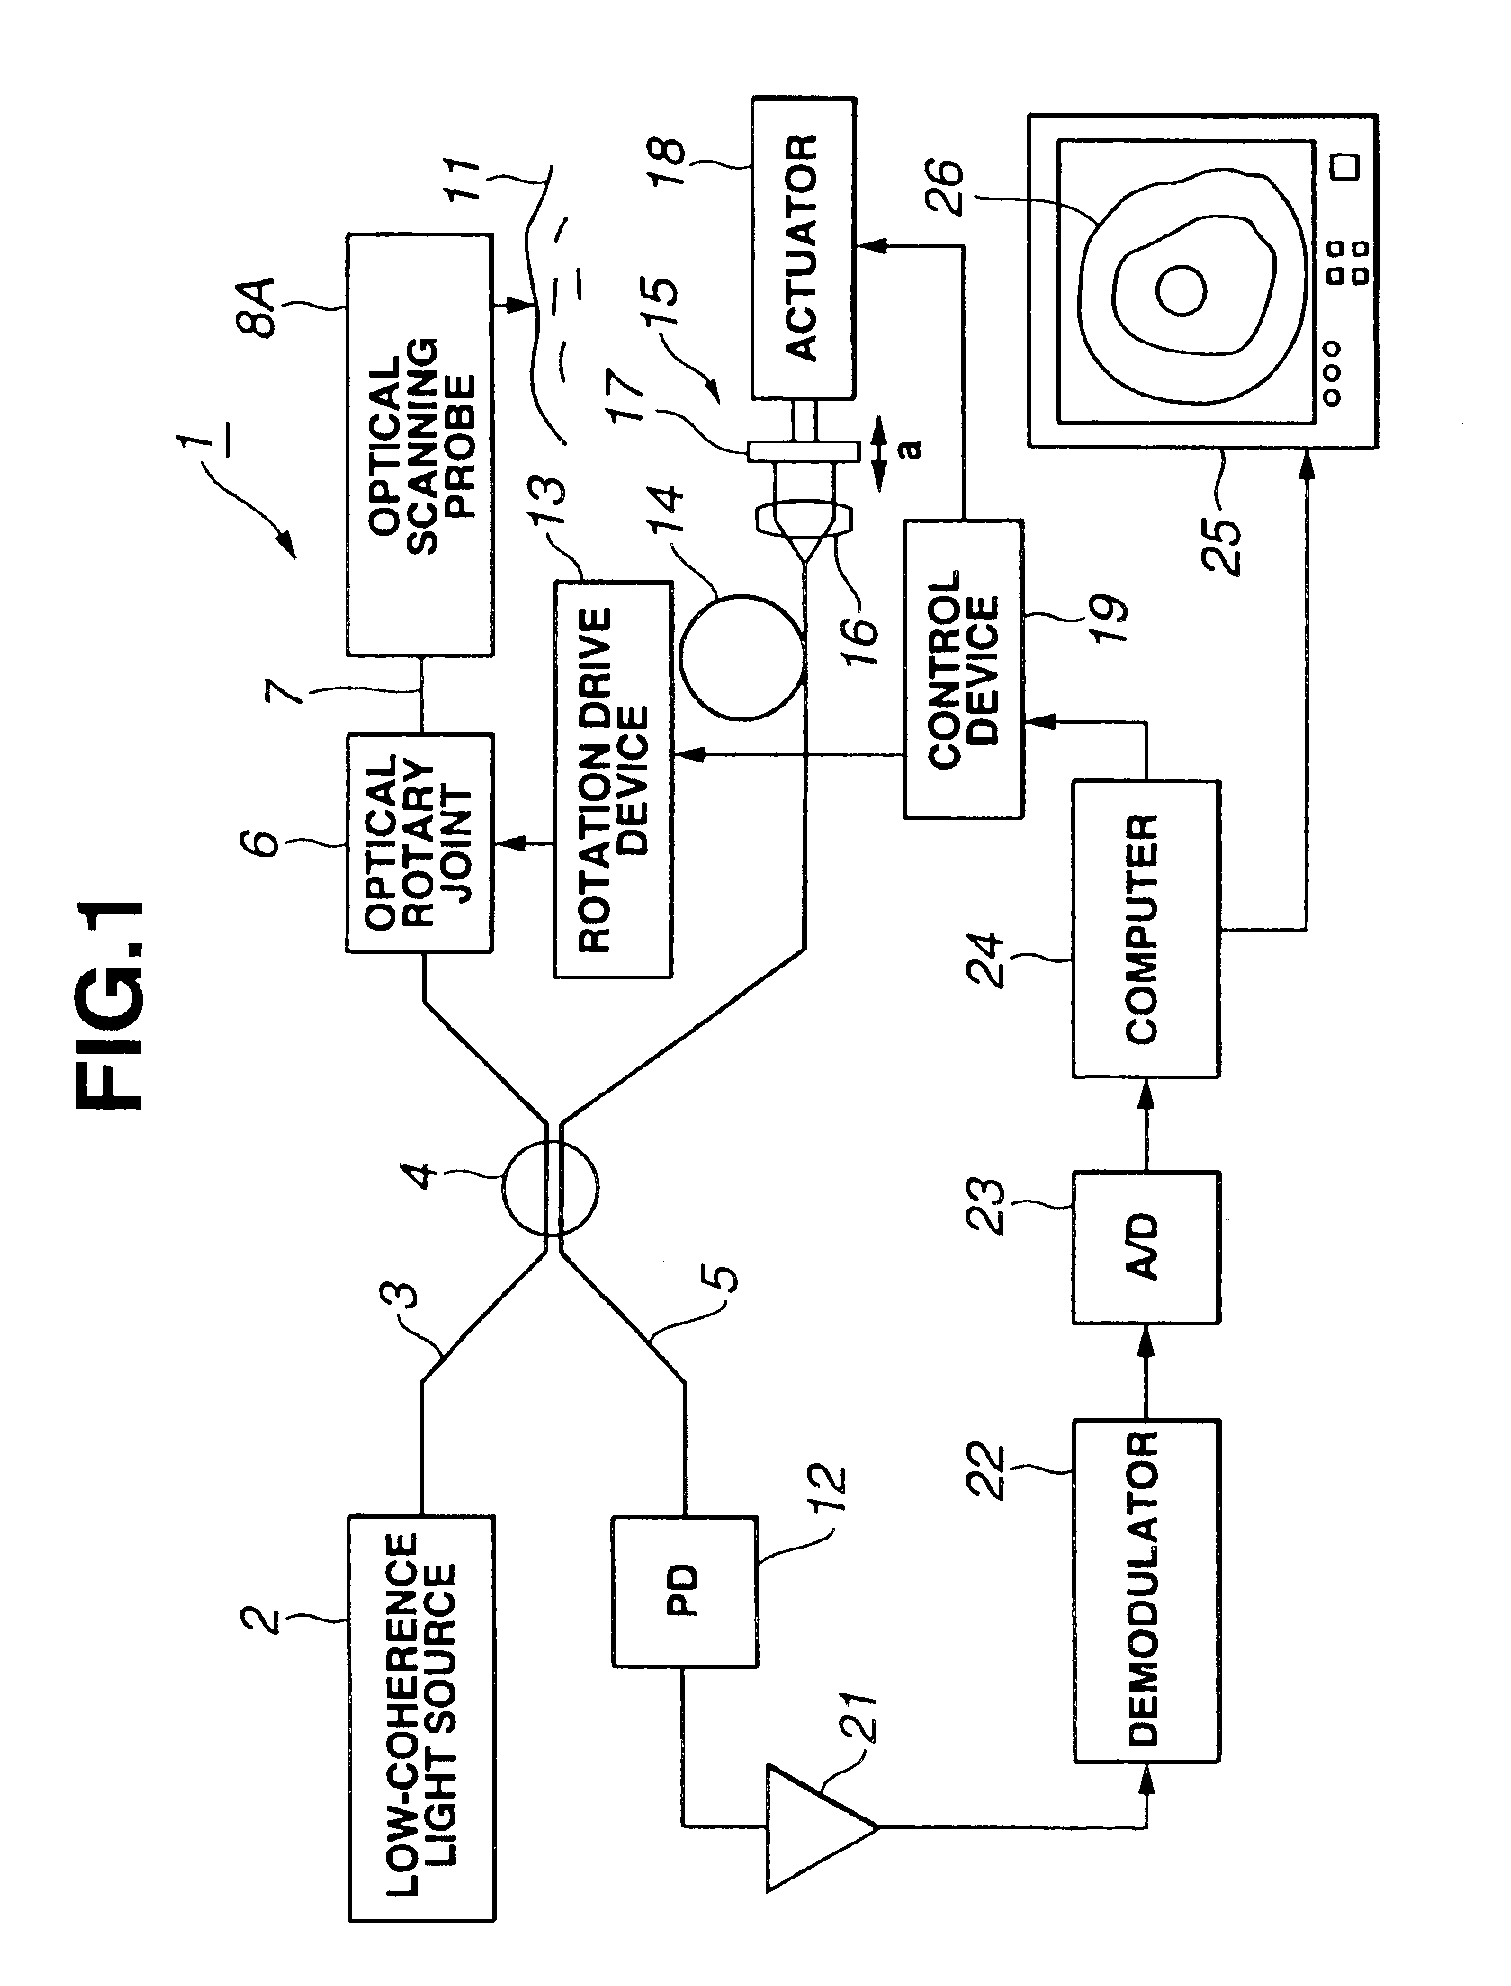 Light scanning probe apparatus using light of low coherence